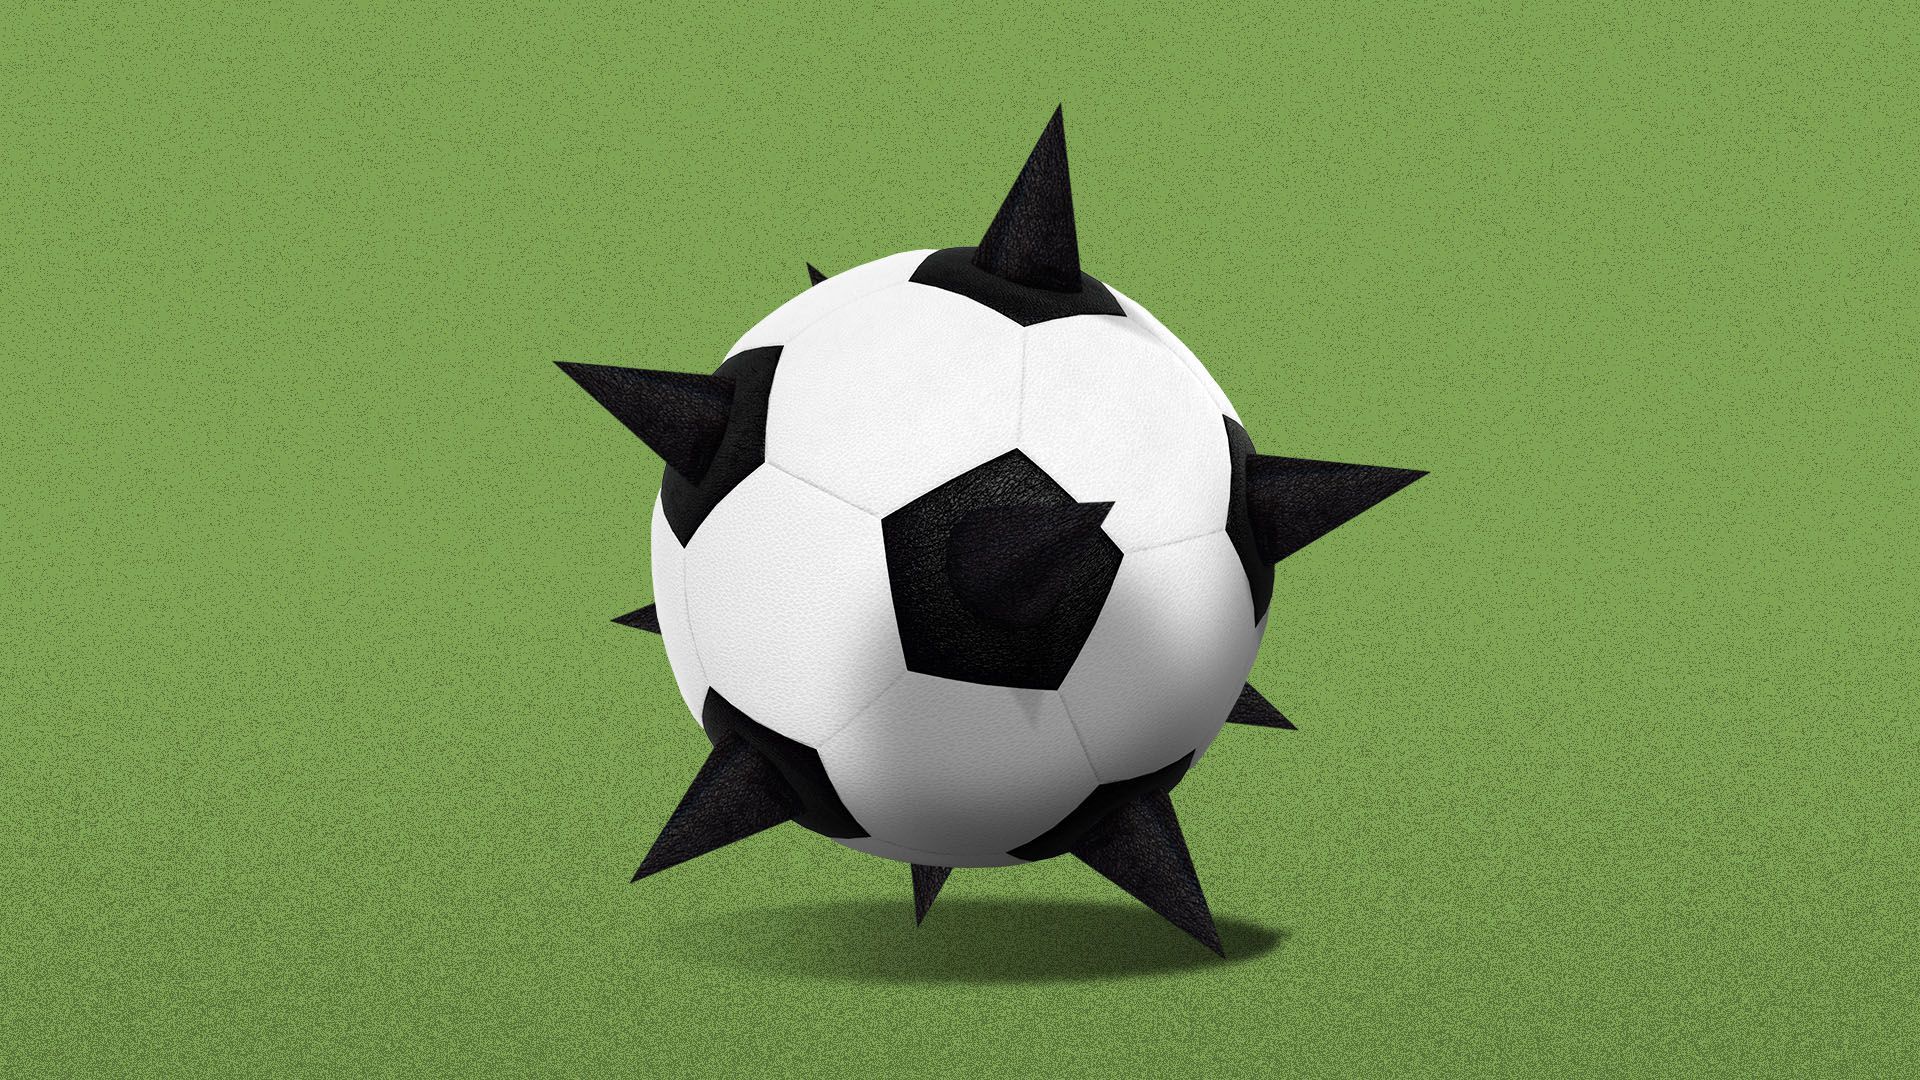 Illustration of a soccer ball with spikes coming out of it